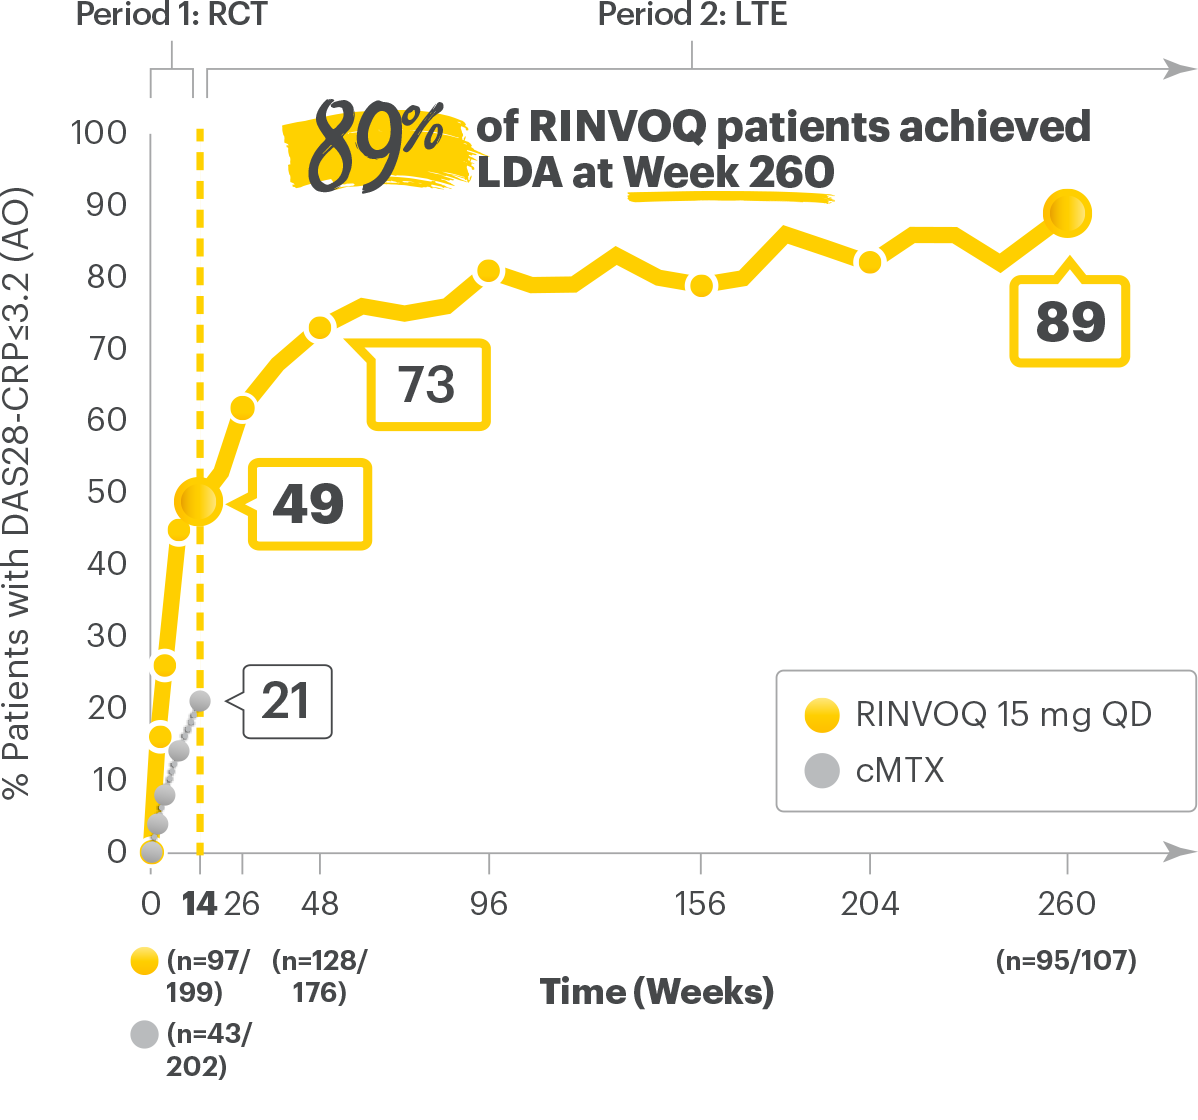 SELECT-MONOTHERAPY: LDA (DAS28-CRP≤3.2) RINVOQ vs cMTX up to Week 260 (AO)